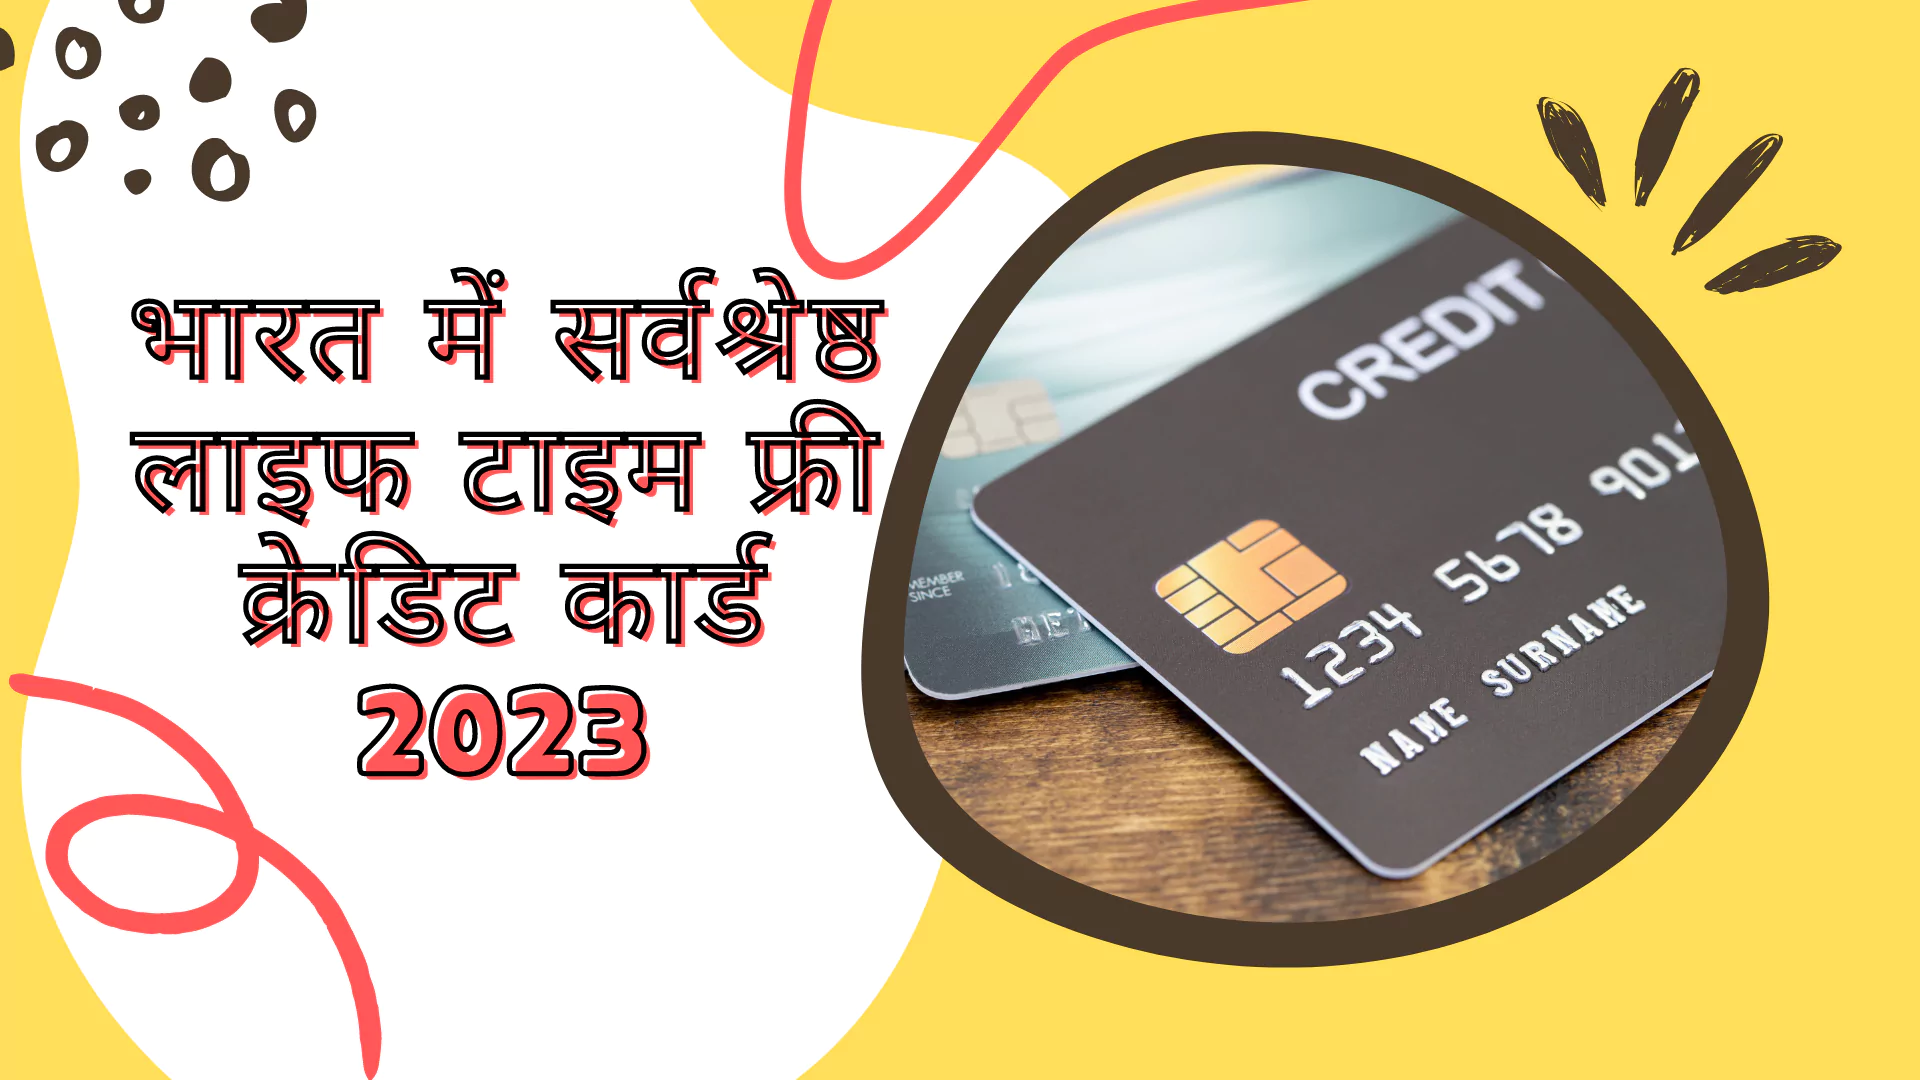 Lifetime Free Credit Card in India